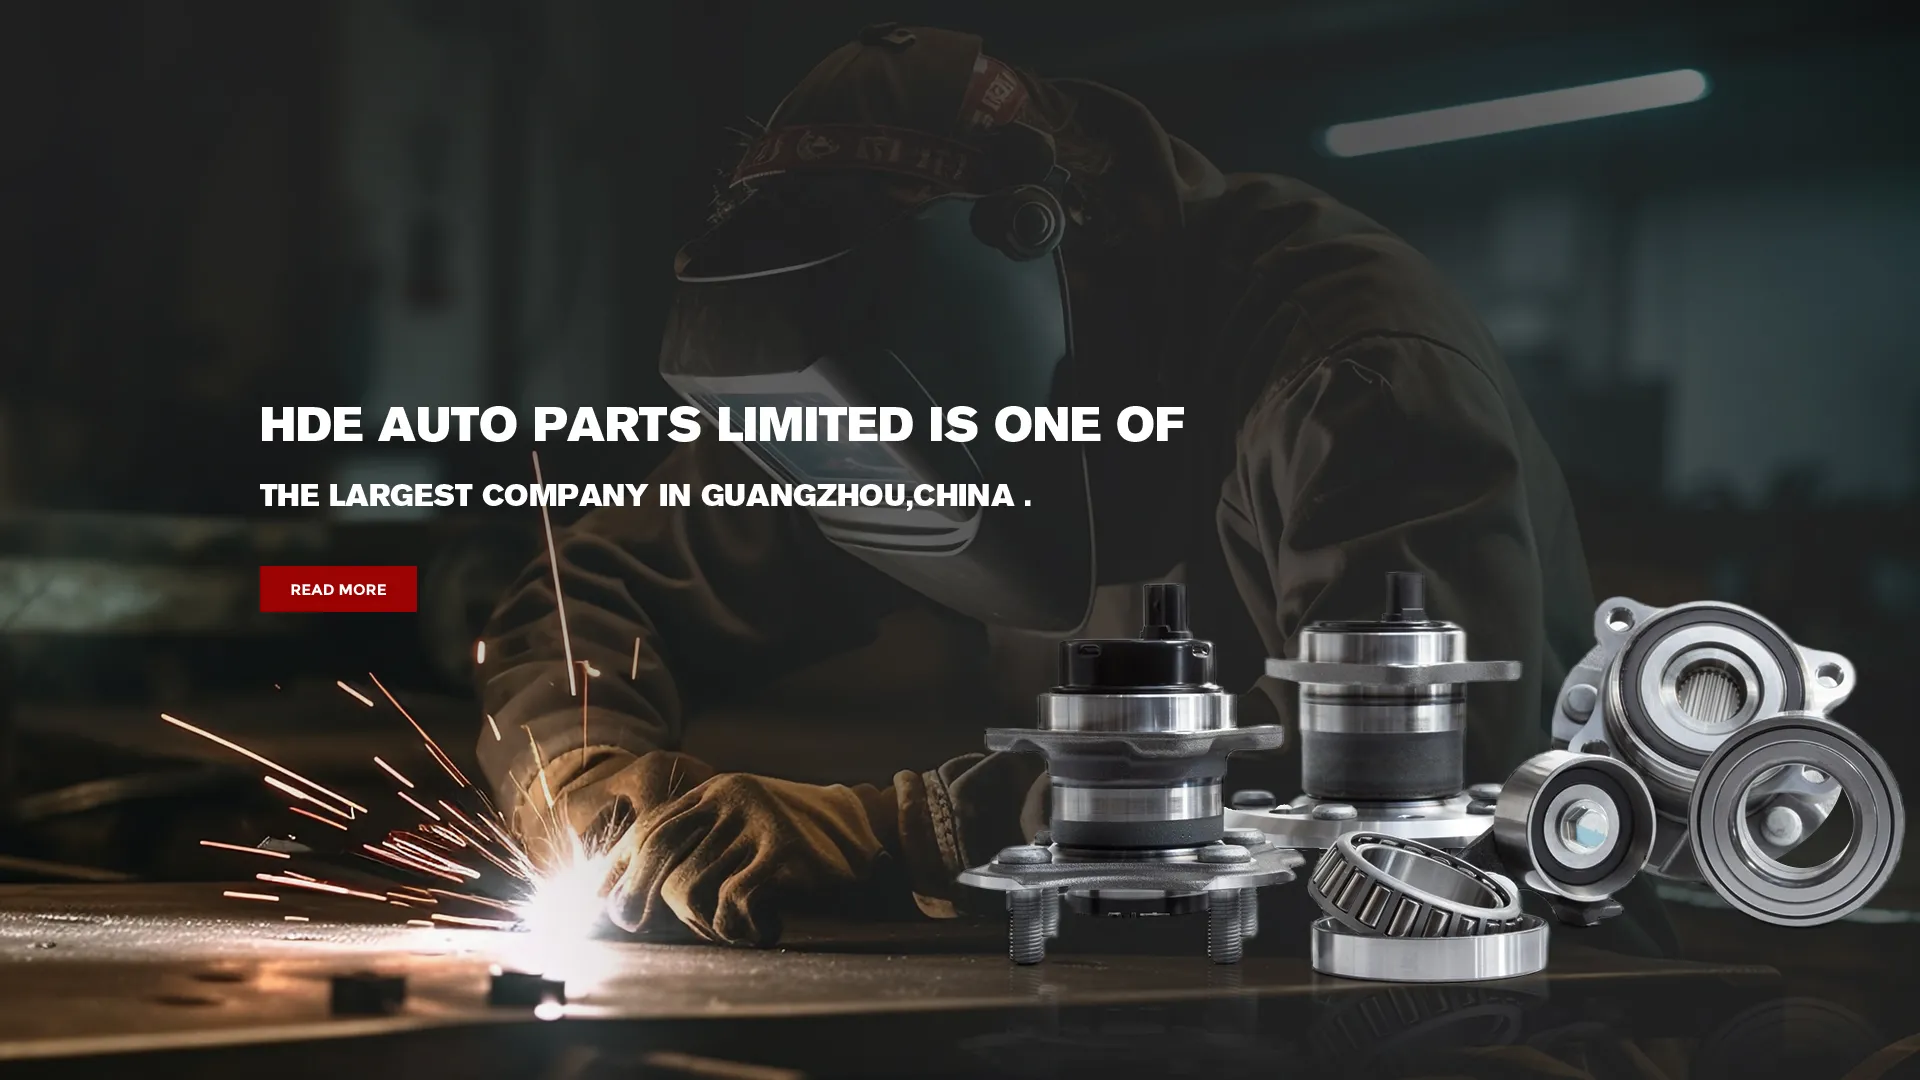 Guangzhou HDE Auto Parts Limited